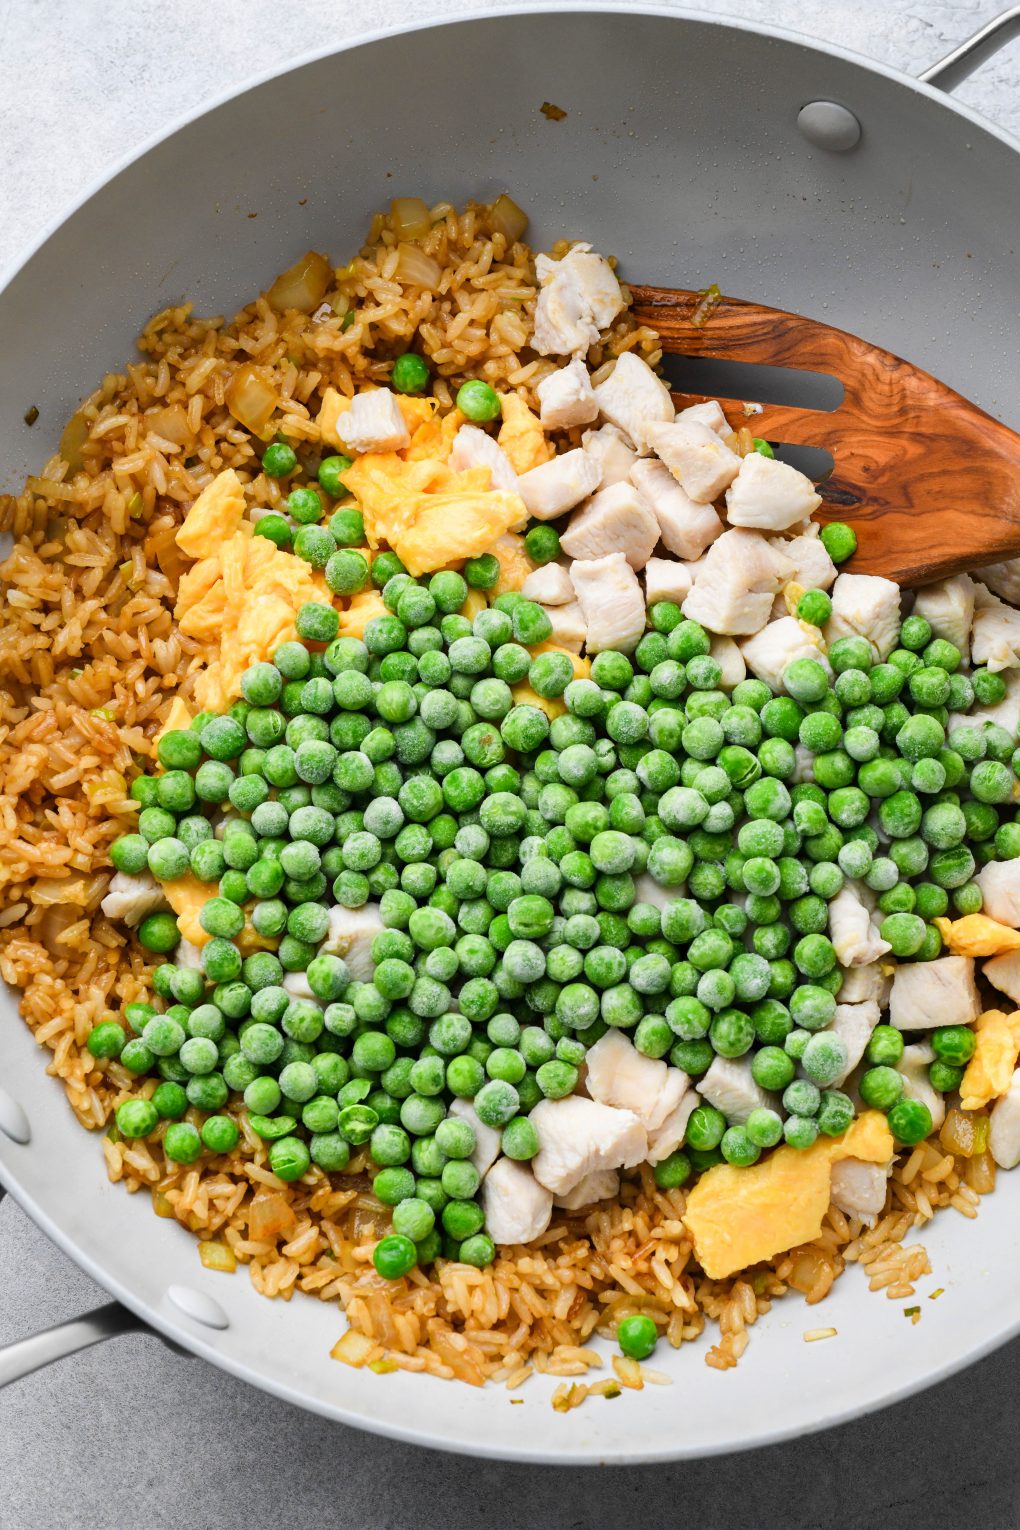 Wok with fried rice, cooked chicken, scrambled eggs, and frozen peas added.